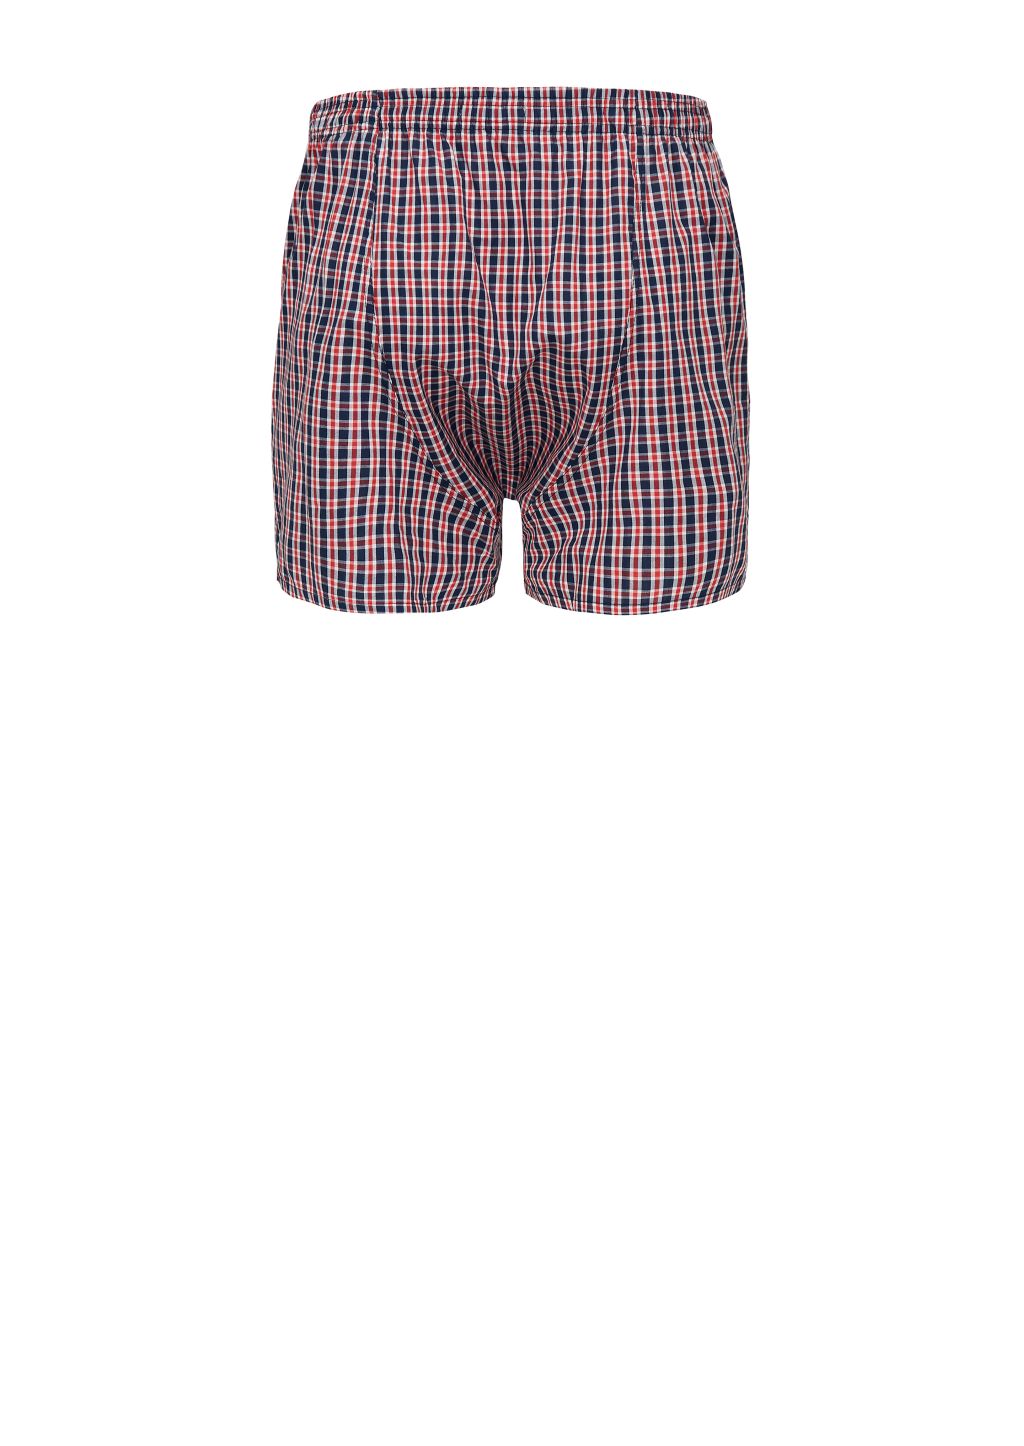 Männer Boxershorts #Checked Blue/White/Red Checked M